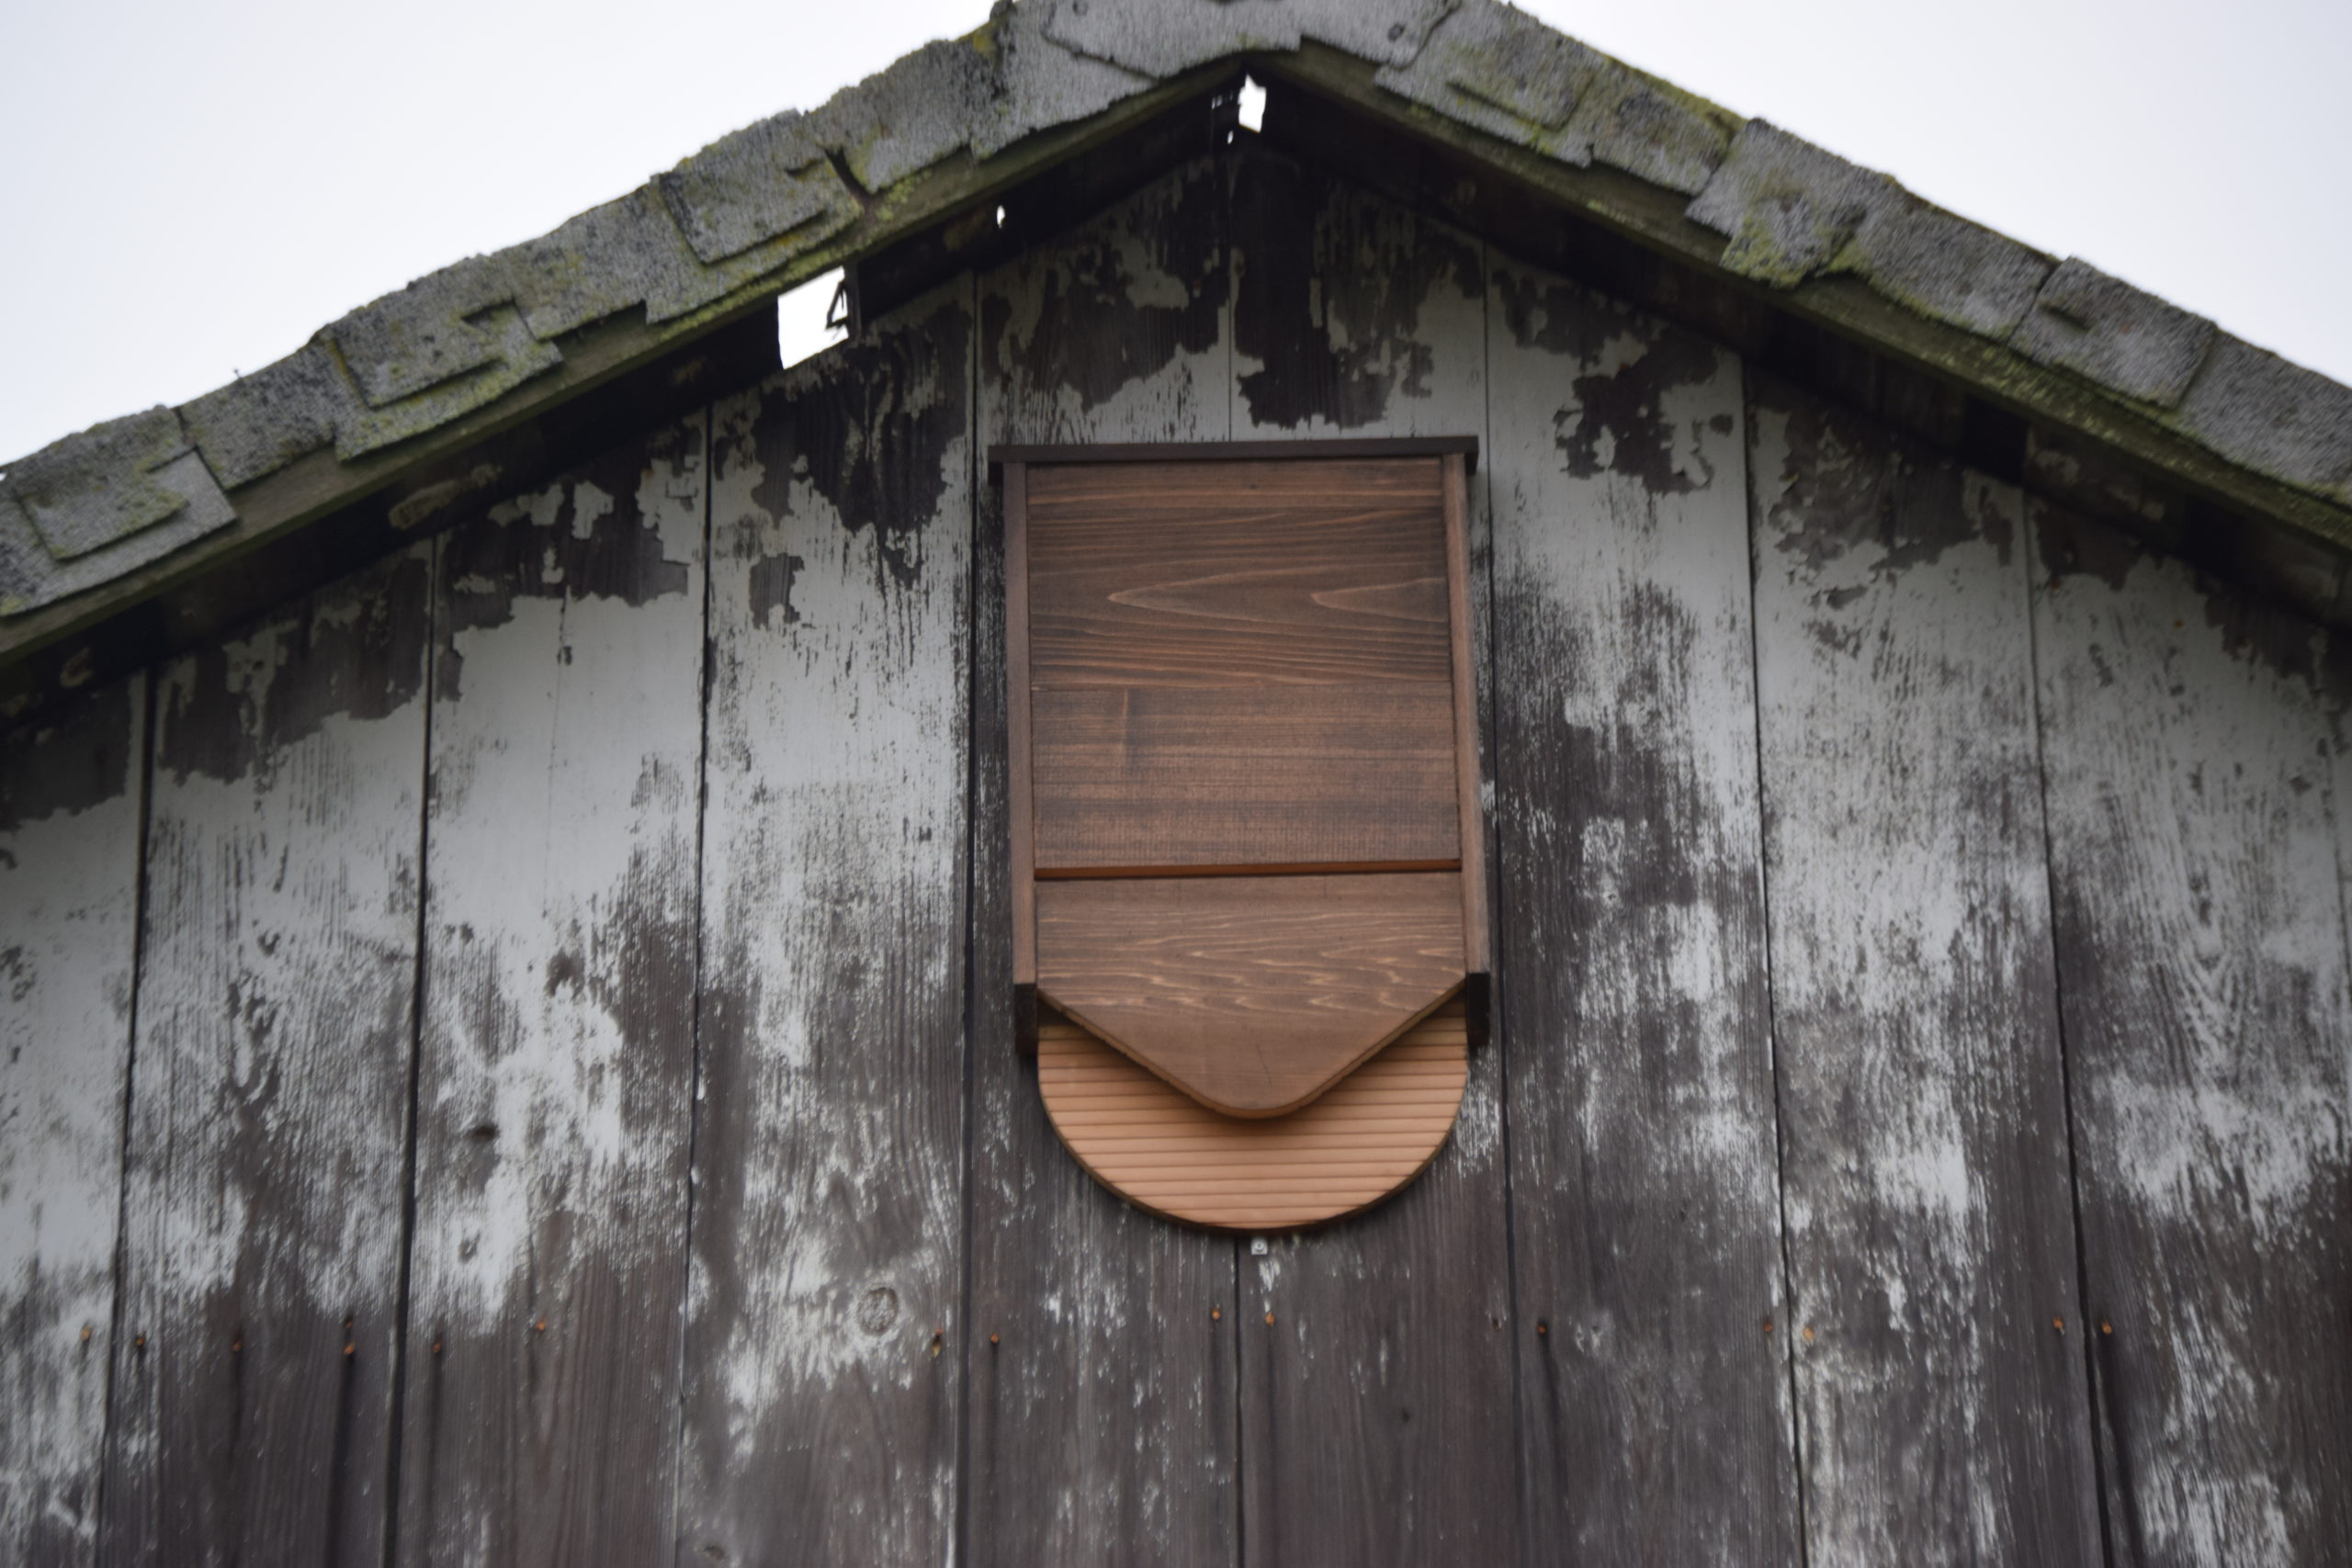 Close-up of the entrance to the bat house here at Blackburn.